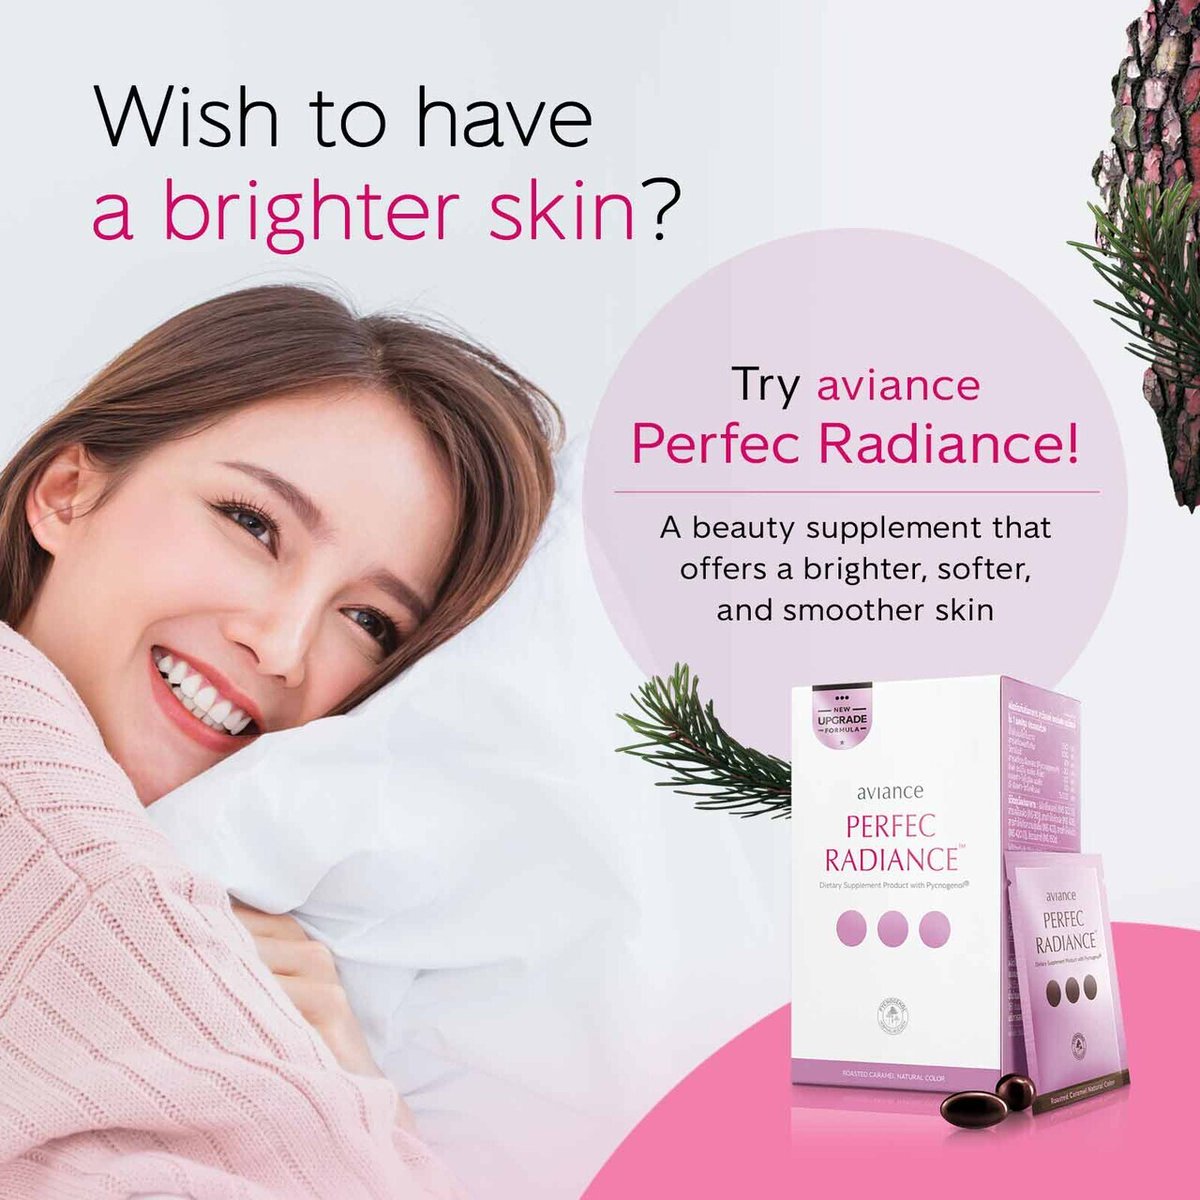 Wish to have a brighter skin? Try aviance Perfec Radiance! A beauty supplement that offers a brighter, softer, and smoother skin. wu.to/8R8p9y #PerfectRadiance #Beauty #BeautySupplement #aviance #UnileverLife #Ulife